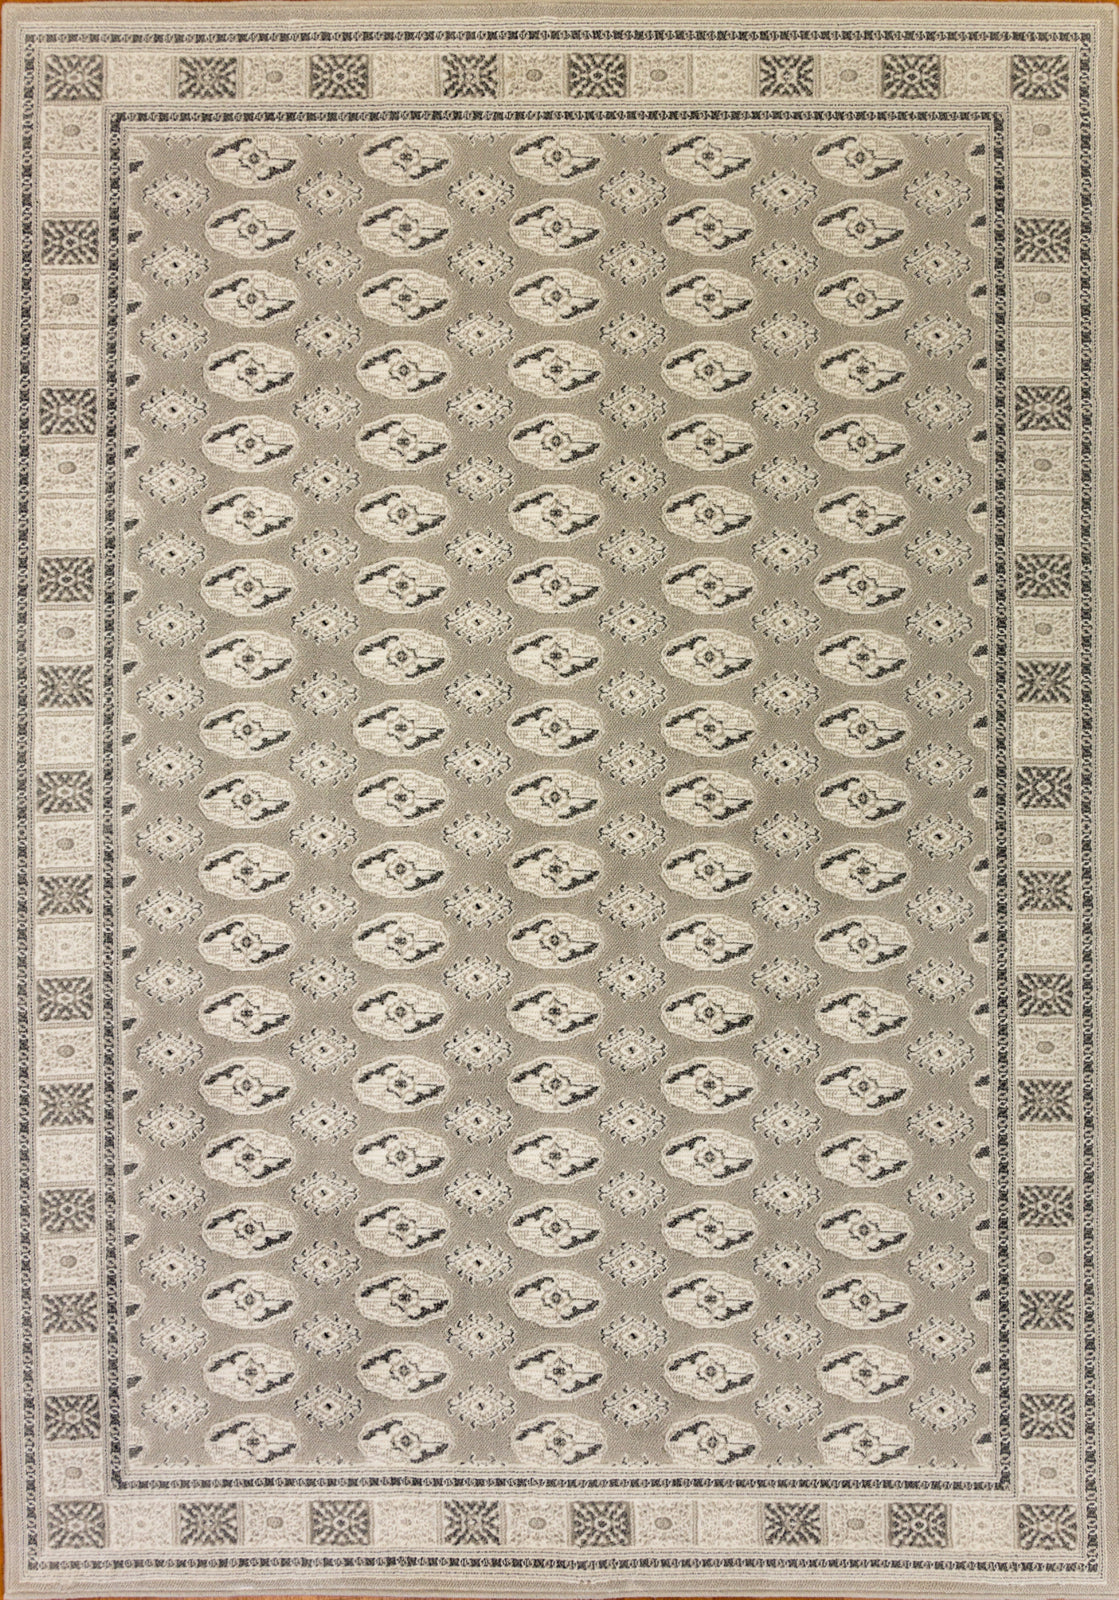 Dynamic Rugs Imperial 12146 Grey Area Rug main image